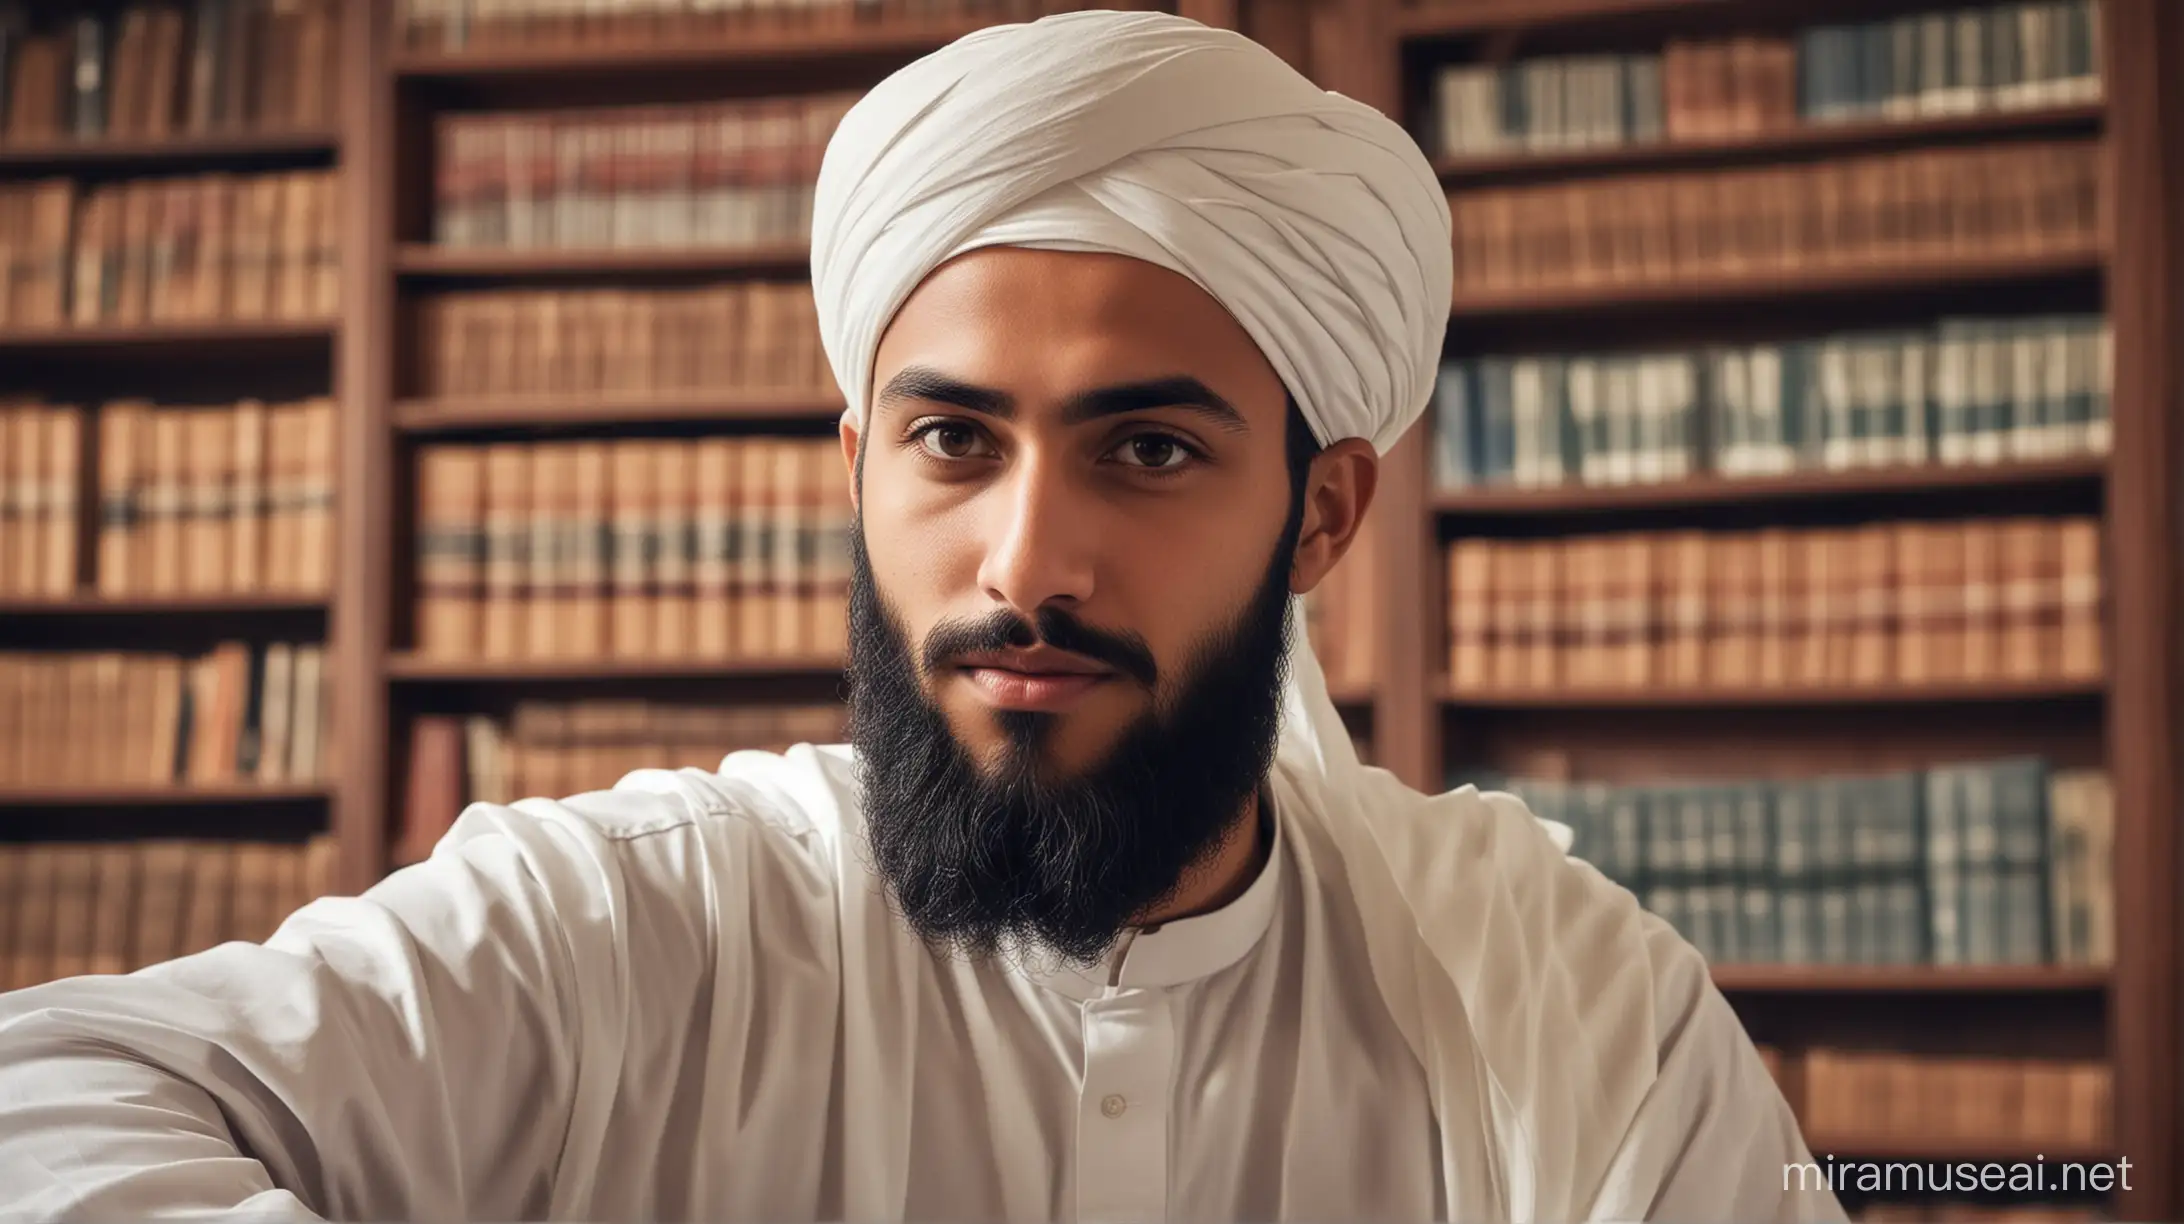 a handsome young Muslim scholar in his late twenties with a divided beard wearing a white turban looking dirctly as if giving a lecture and behind him a library 